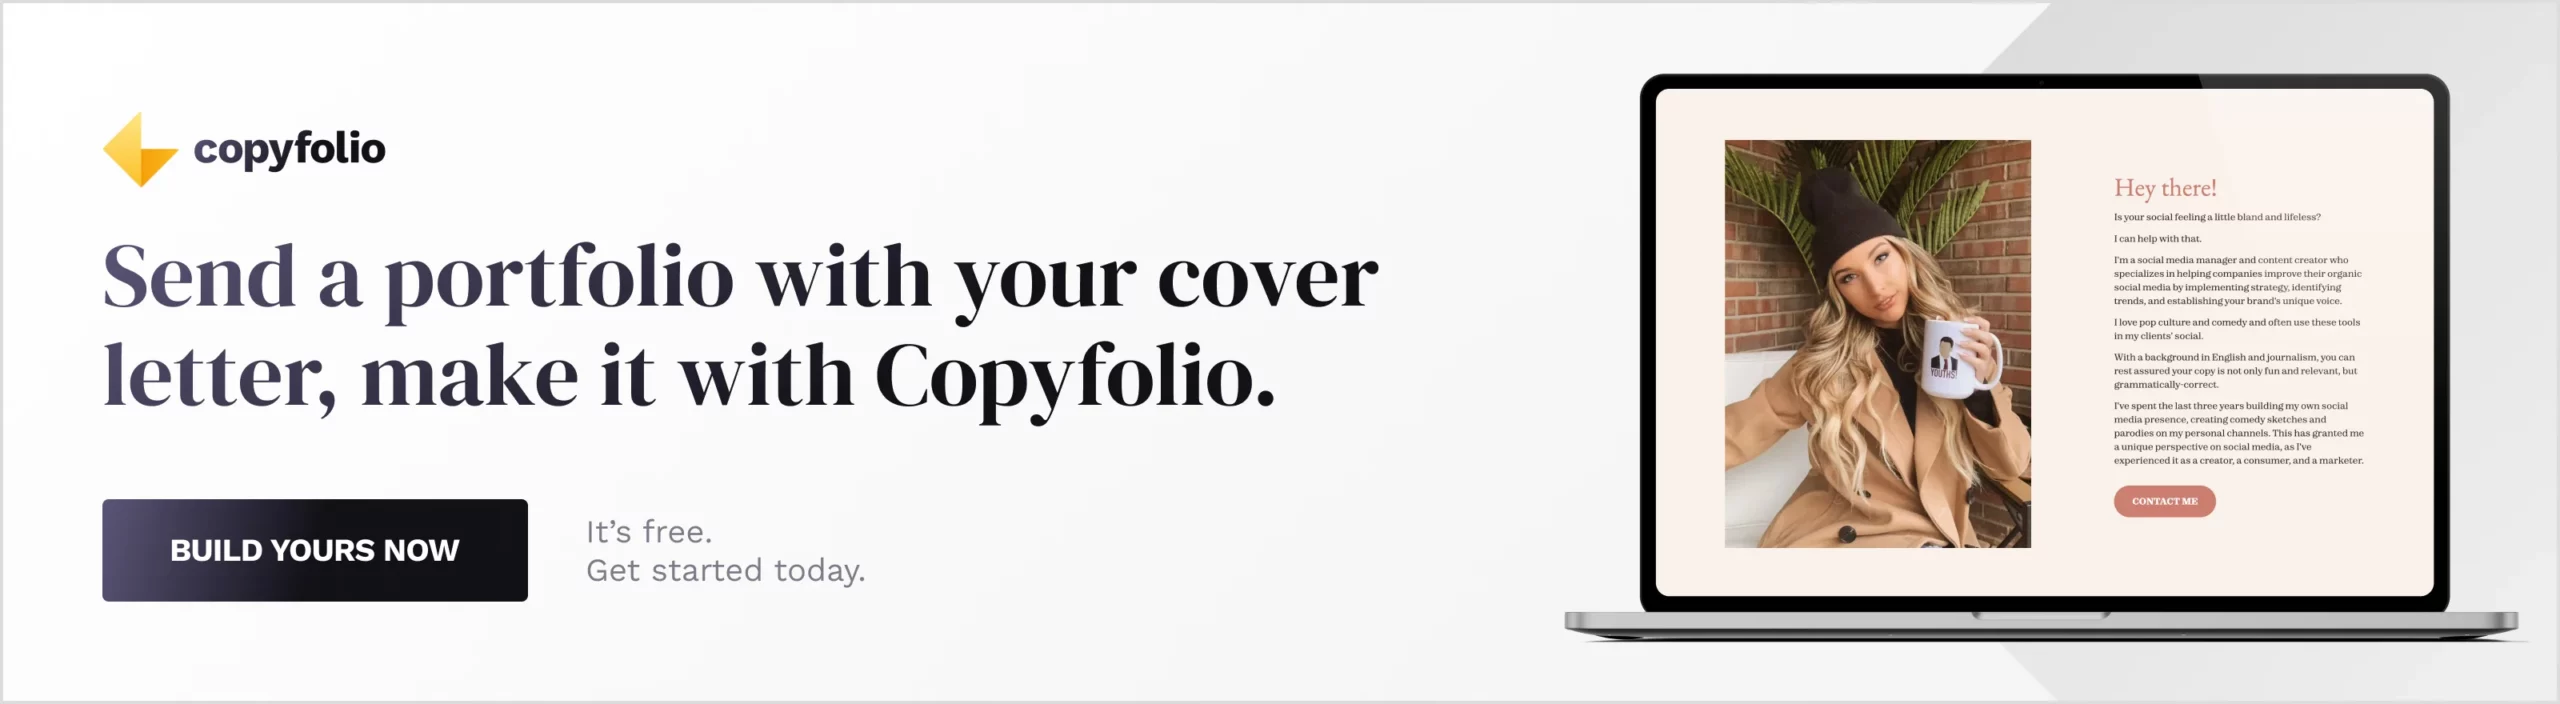 Banner, saying: Send a portfolio with your cover letter, make it with Copyfolio. Underneath this tagline is a button saying "Build yours now". Next to them, on the right side is a screenshot from a social media portfolio website's about section in a laptop mockup.